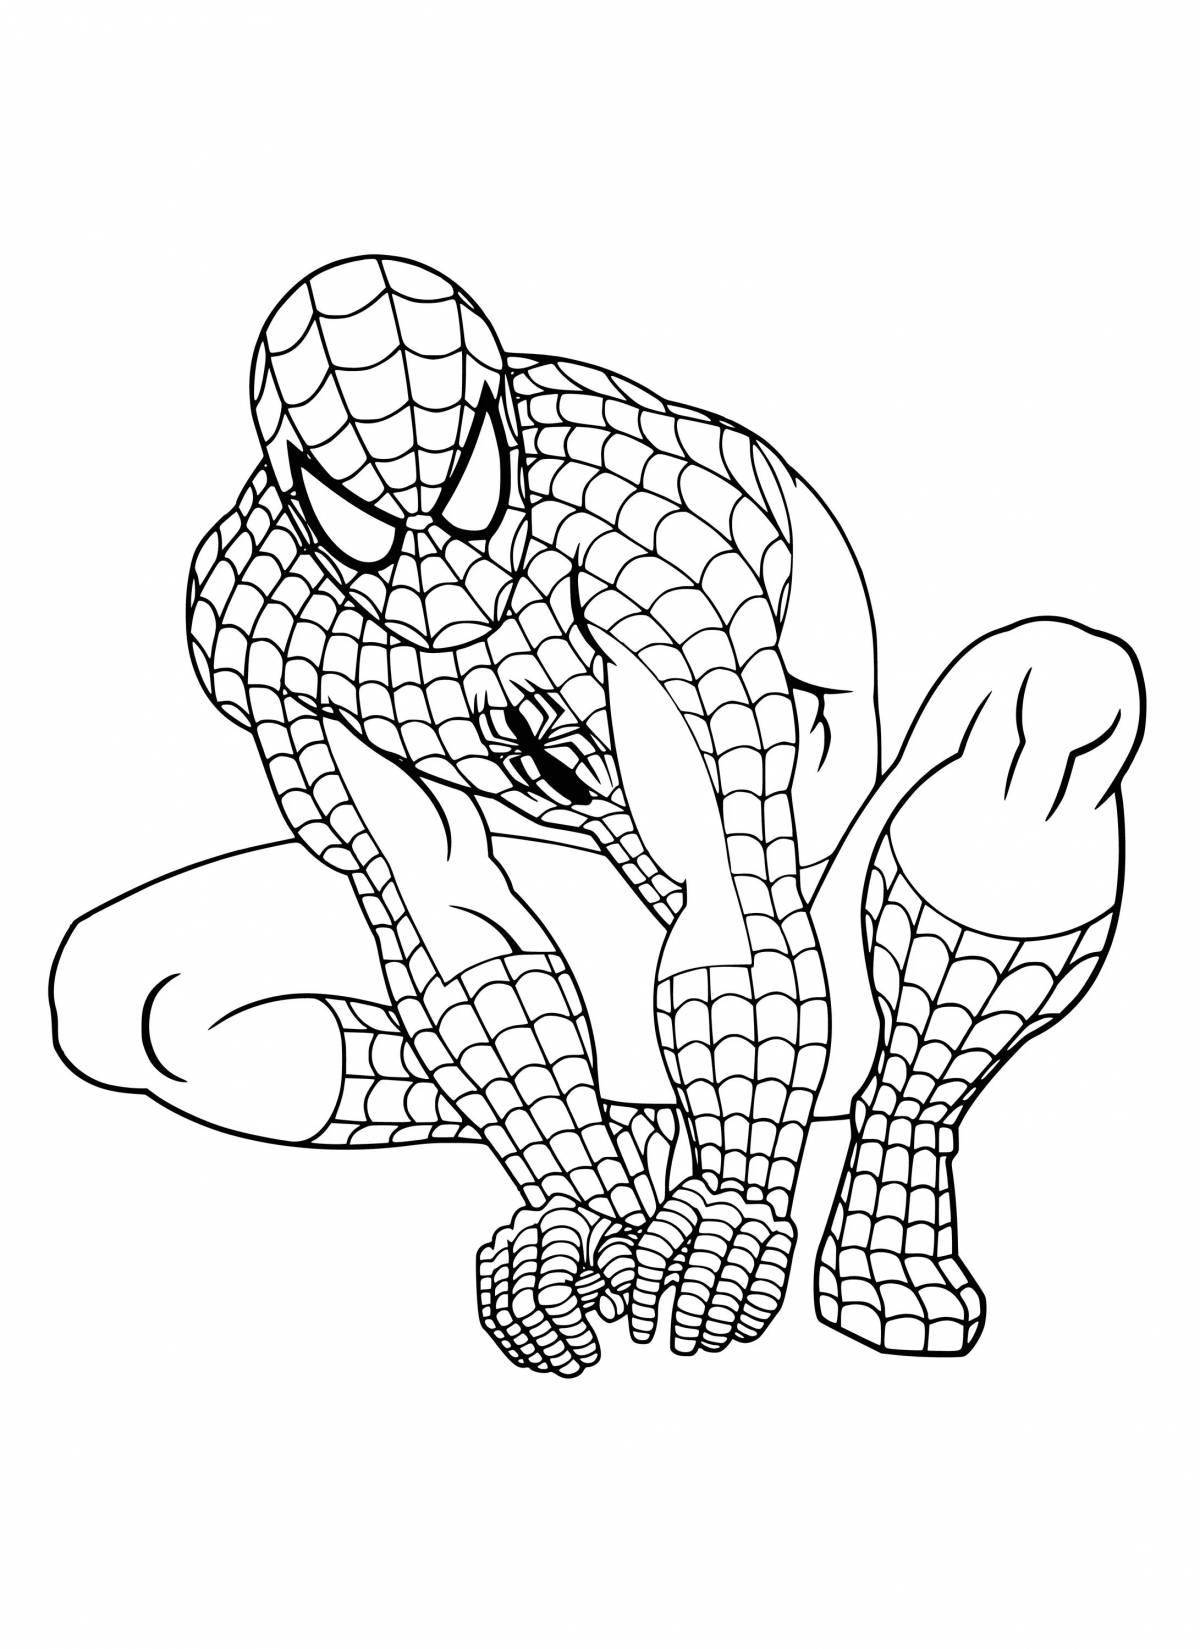 Colorful spider-man coloring page